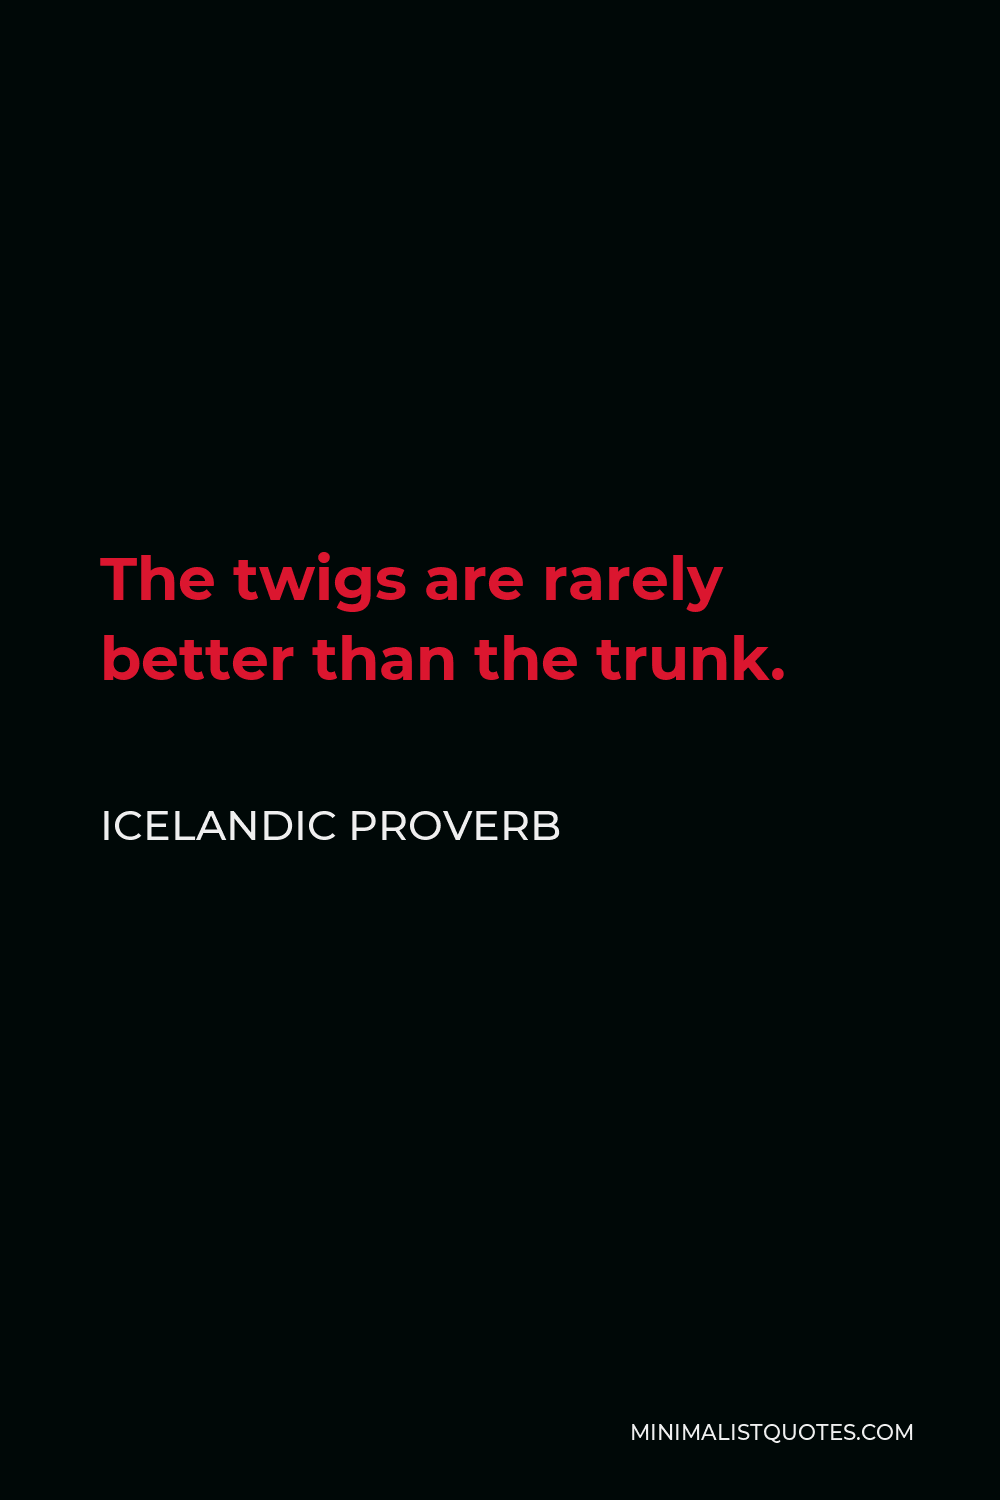 Icelandic Proverb Quote - The twigs are rarely better than the trunk.